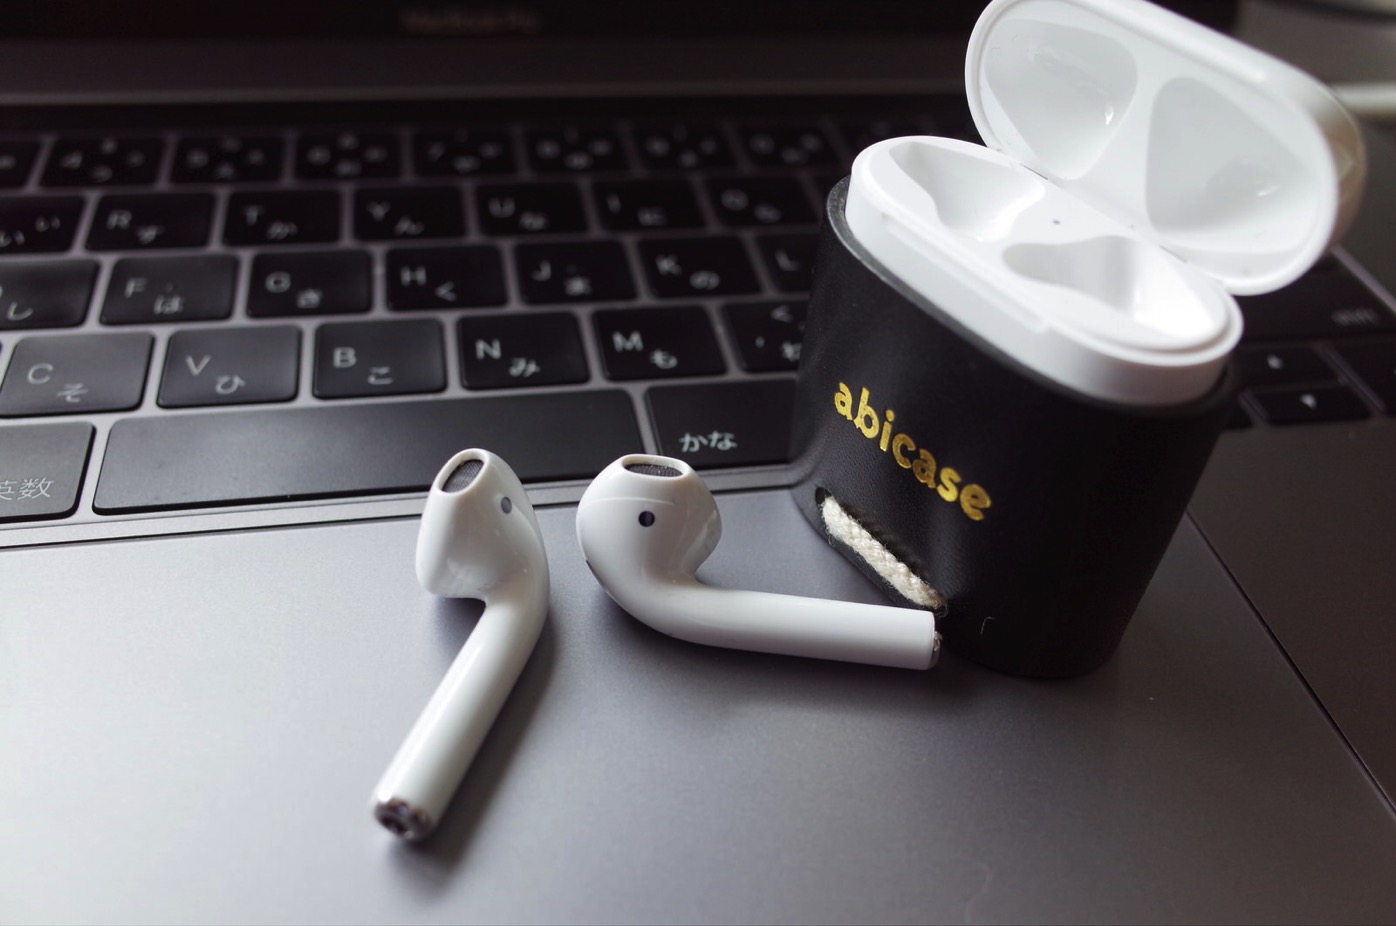 [AirPods]改めてAirPodsの潜在能力の高さを思い知らされたよ